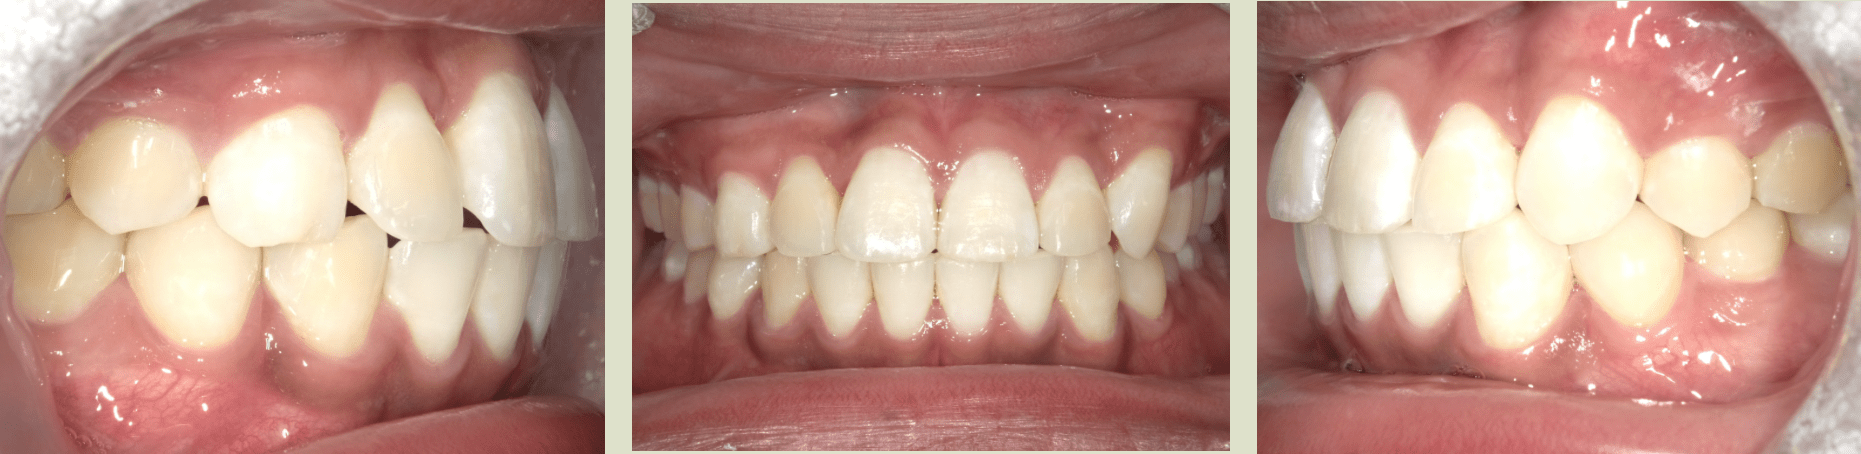 ROW ALM AFTER INVIS TREATMENT